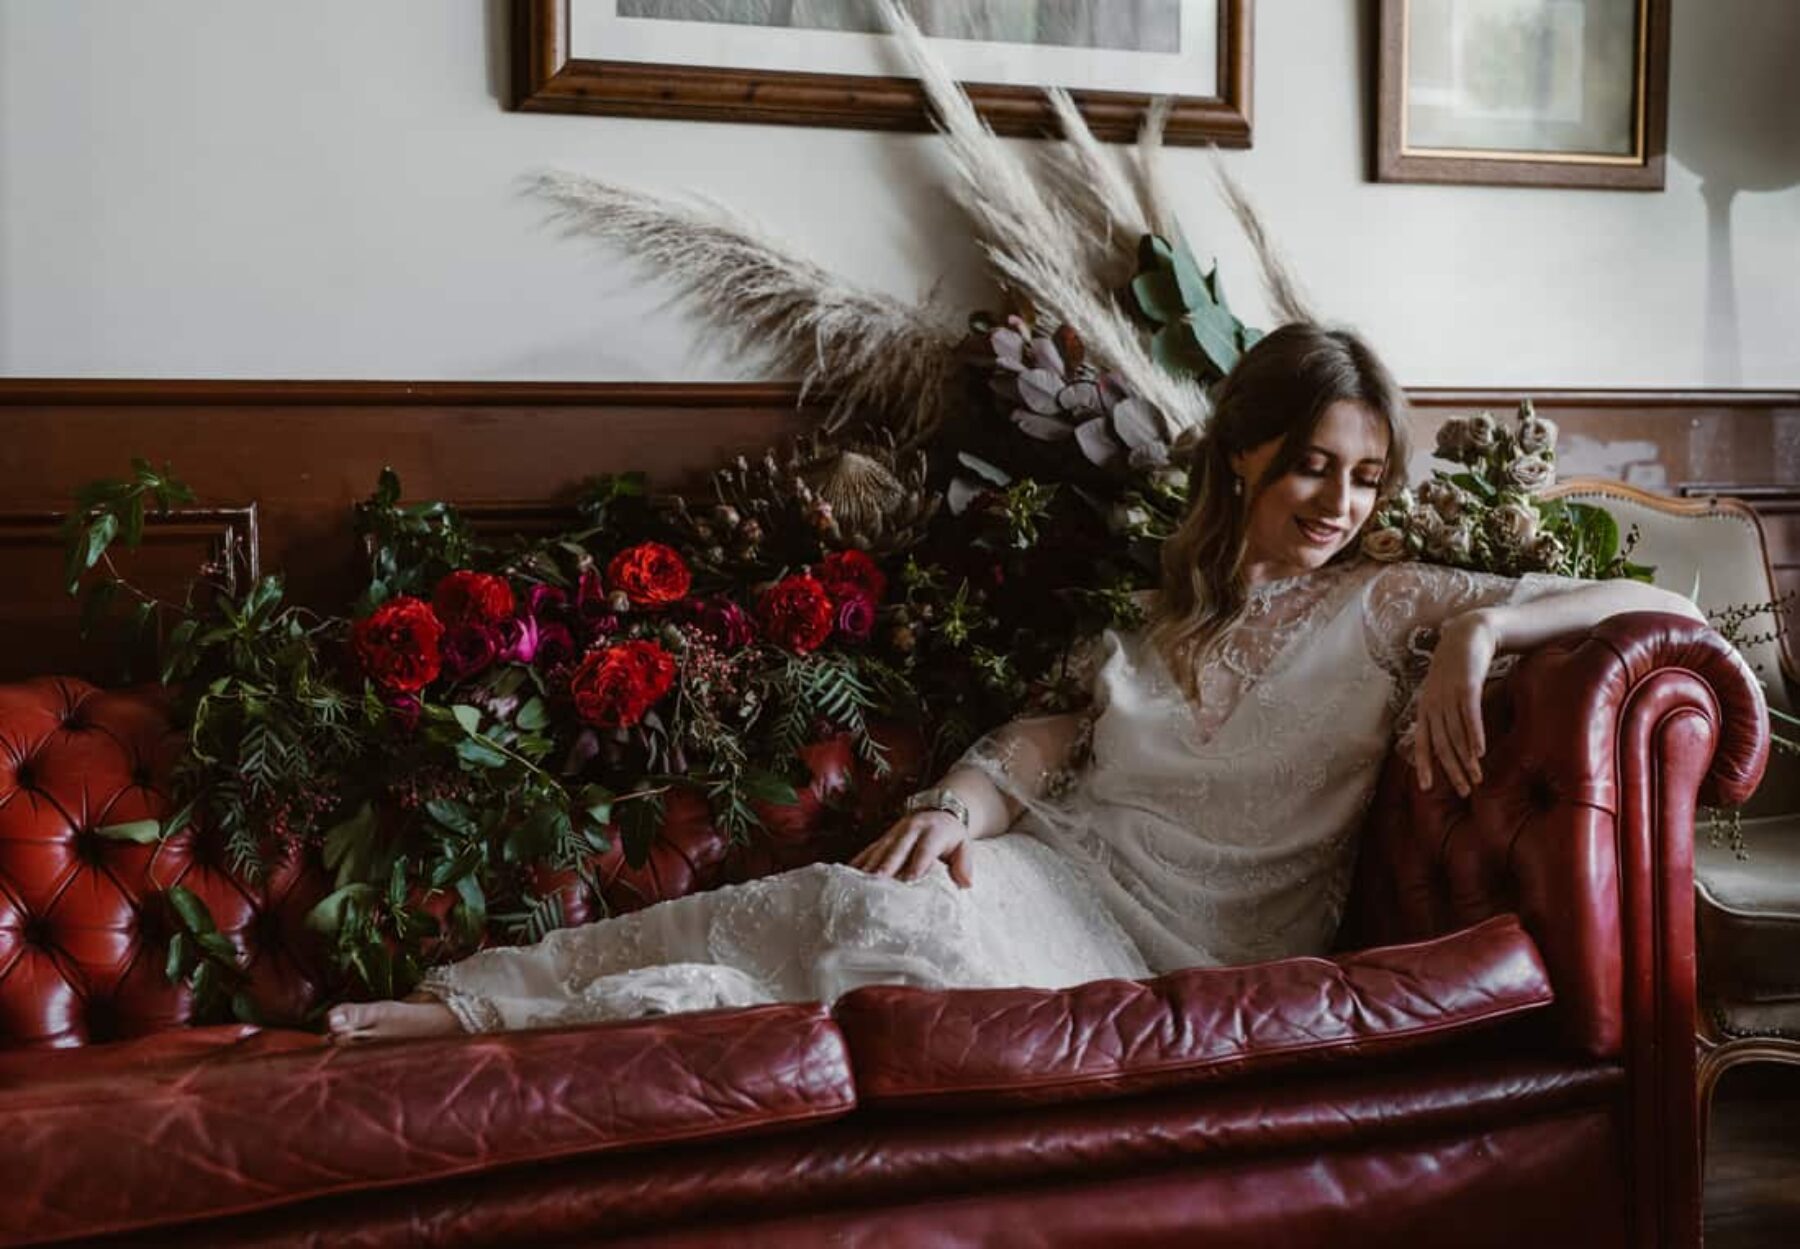 vintage winter wedding inspiration at The Stanley pub in Perth WA